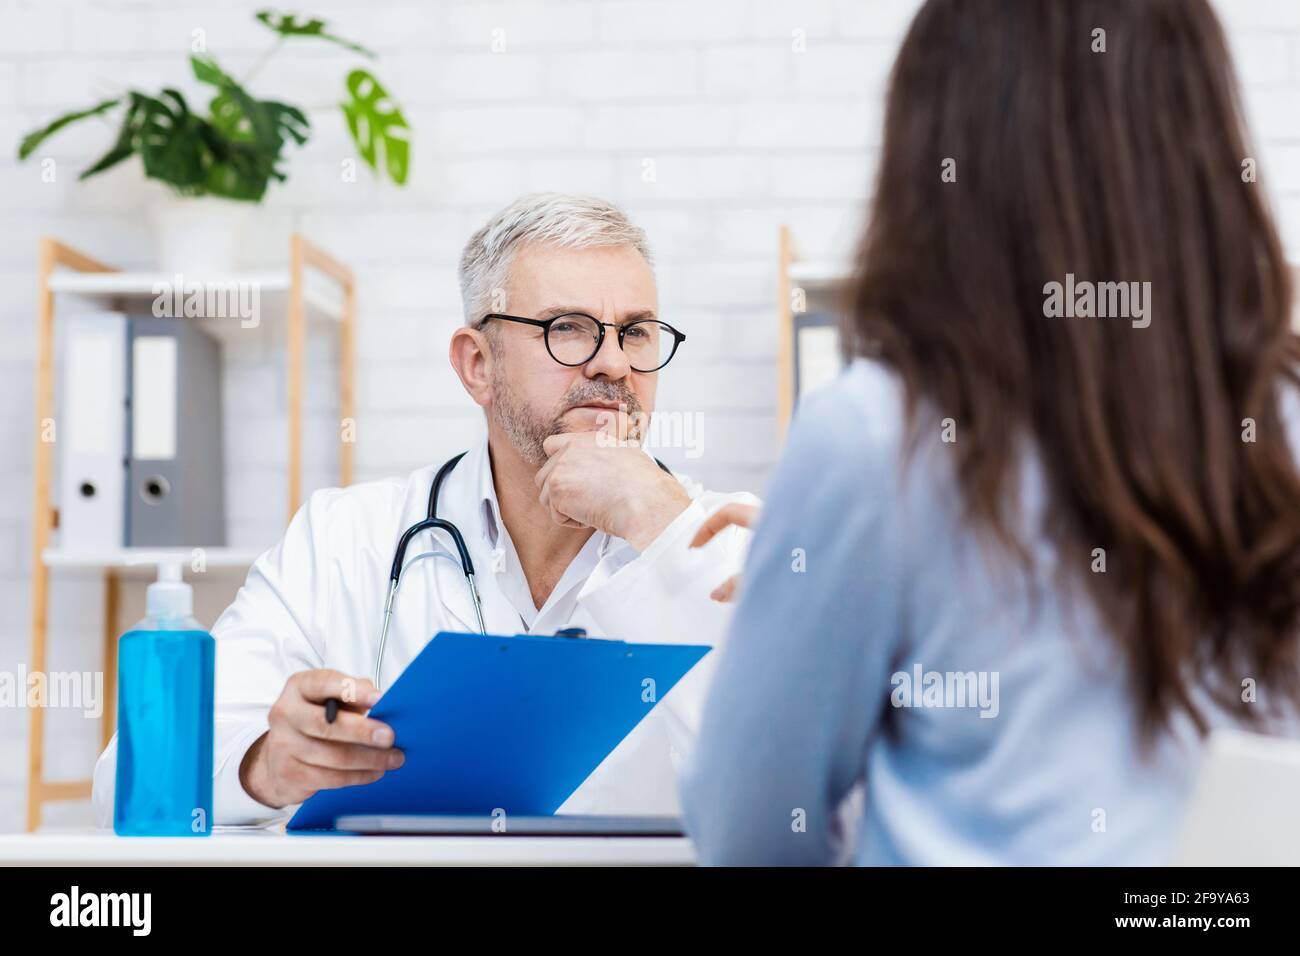 Consult patient in private hospital, diagnostics and medical exam Stock Photo